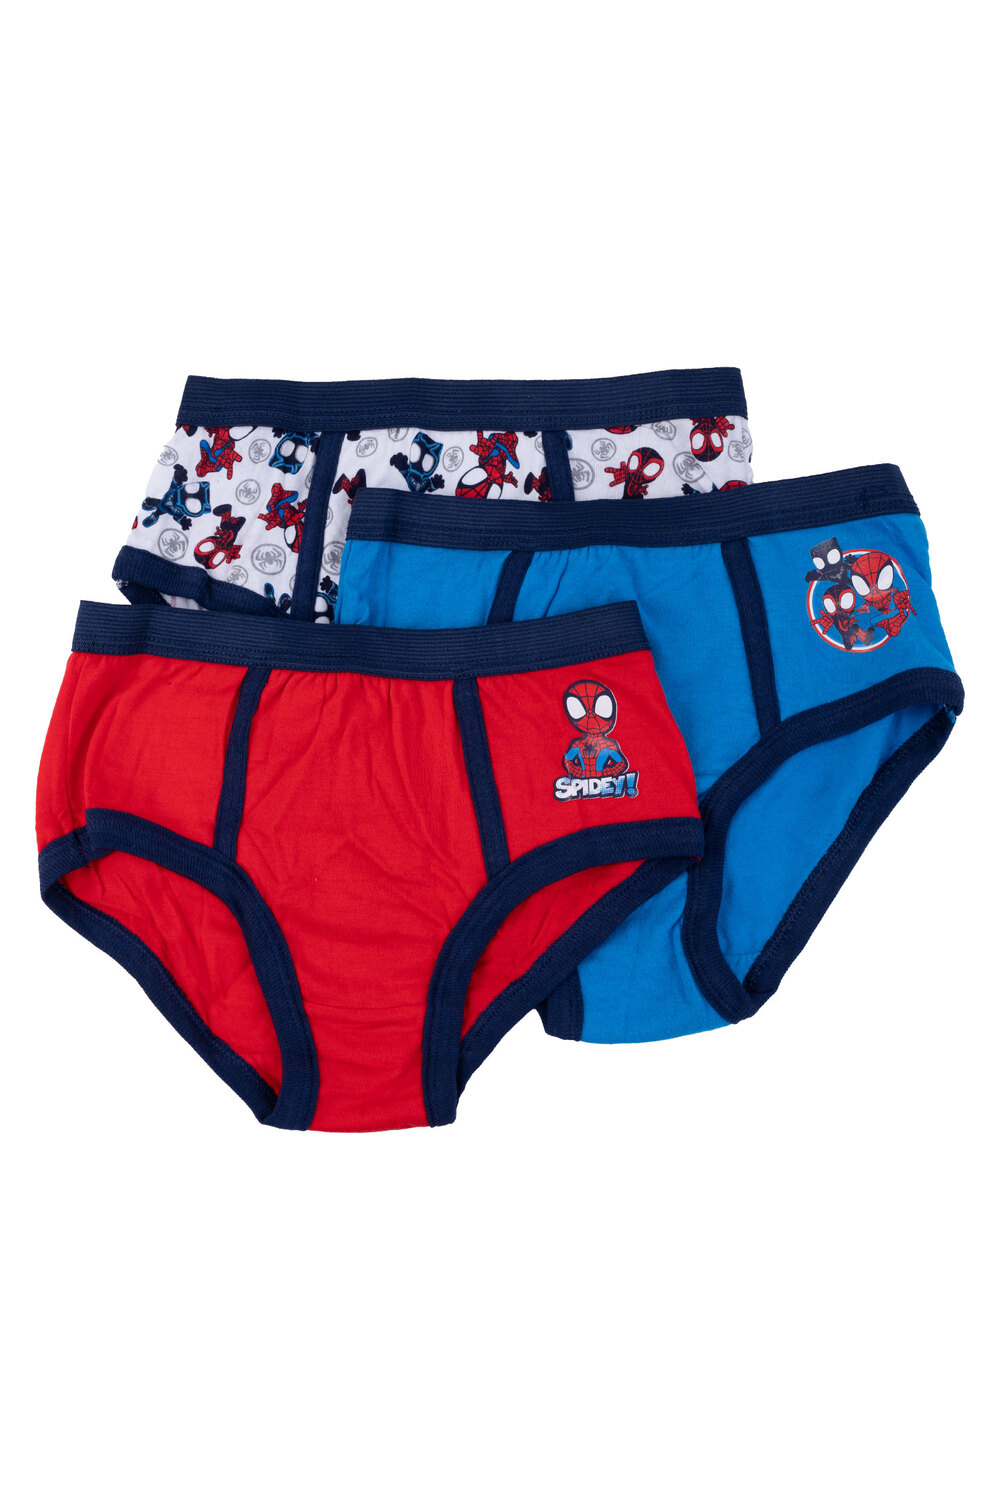 https://www.rossy.ca/media/A2W/products/marvel-spidey-and-his-amazing-friends-boys-cotton-briefs-pk-of-3-85984-2.jpg